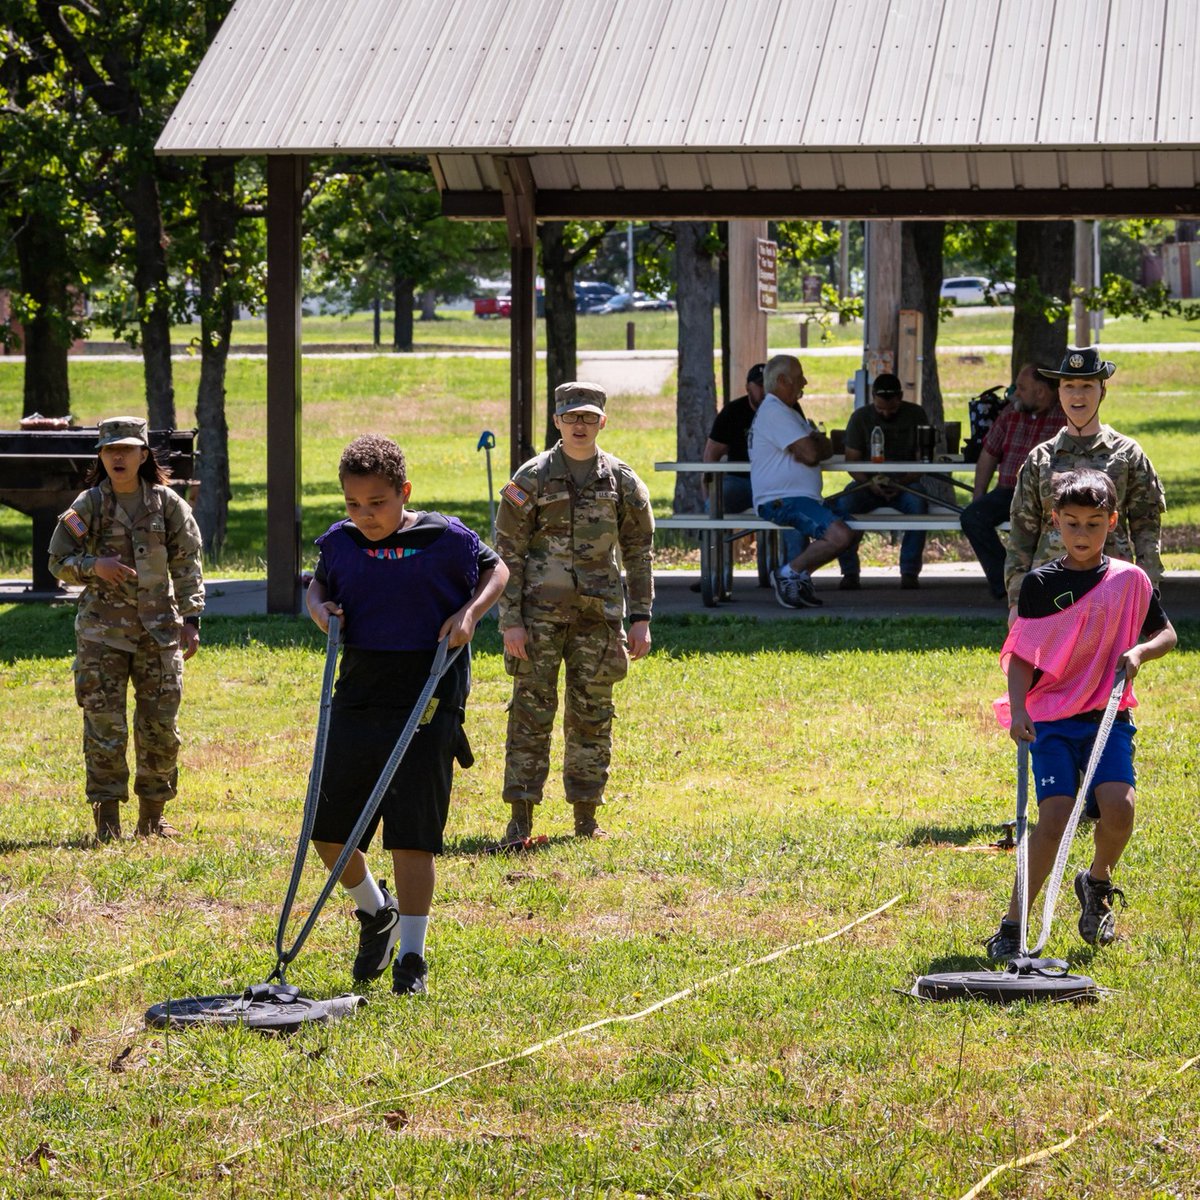 The 43rd AG Reception Battalion at @fortleonardwood hosted students from Crocker Elementary for Field Day! During the event, students participated in fitness challenges, a scavenger hunt and a hands-on experience with emergency response vehicles. #BeAllYouCanBe @MOEducation